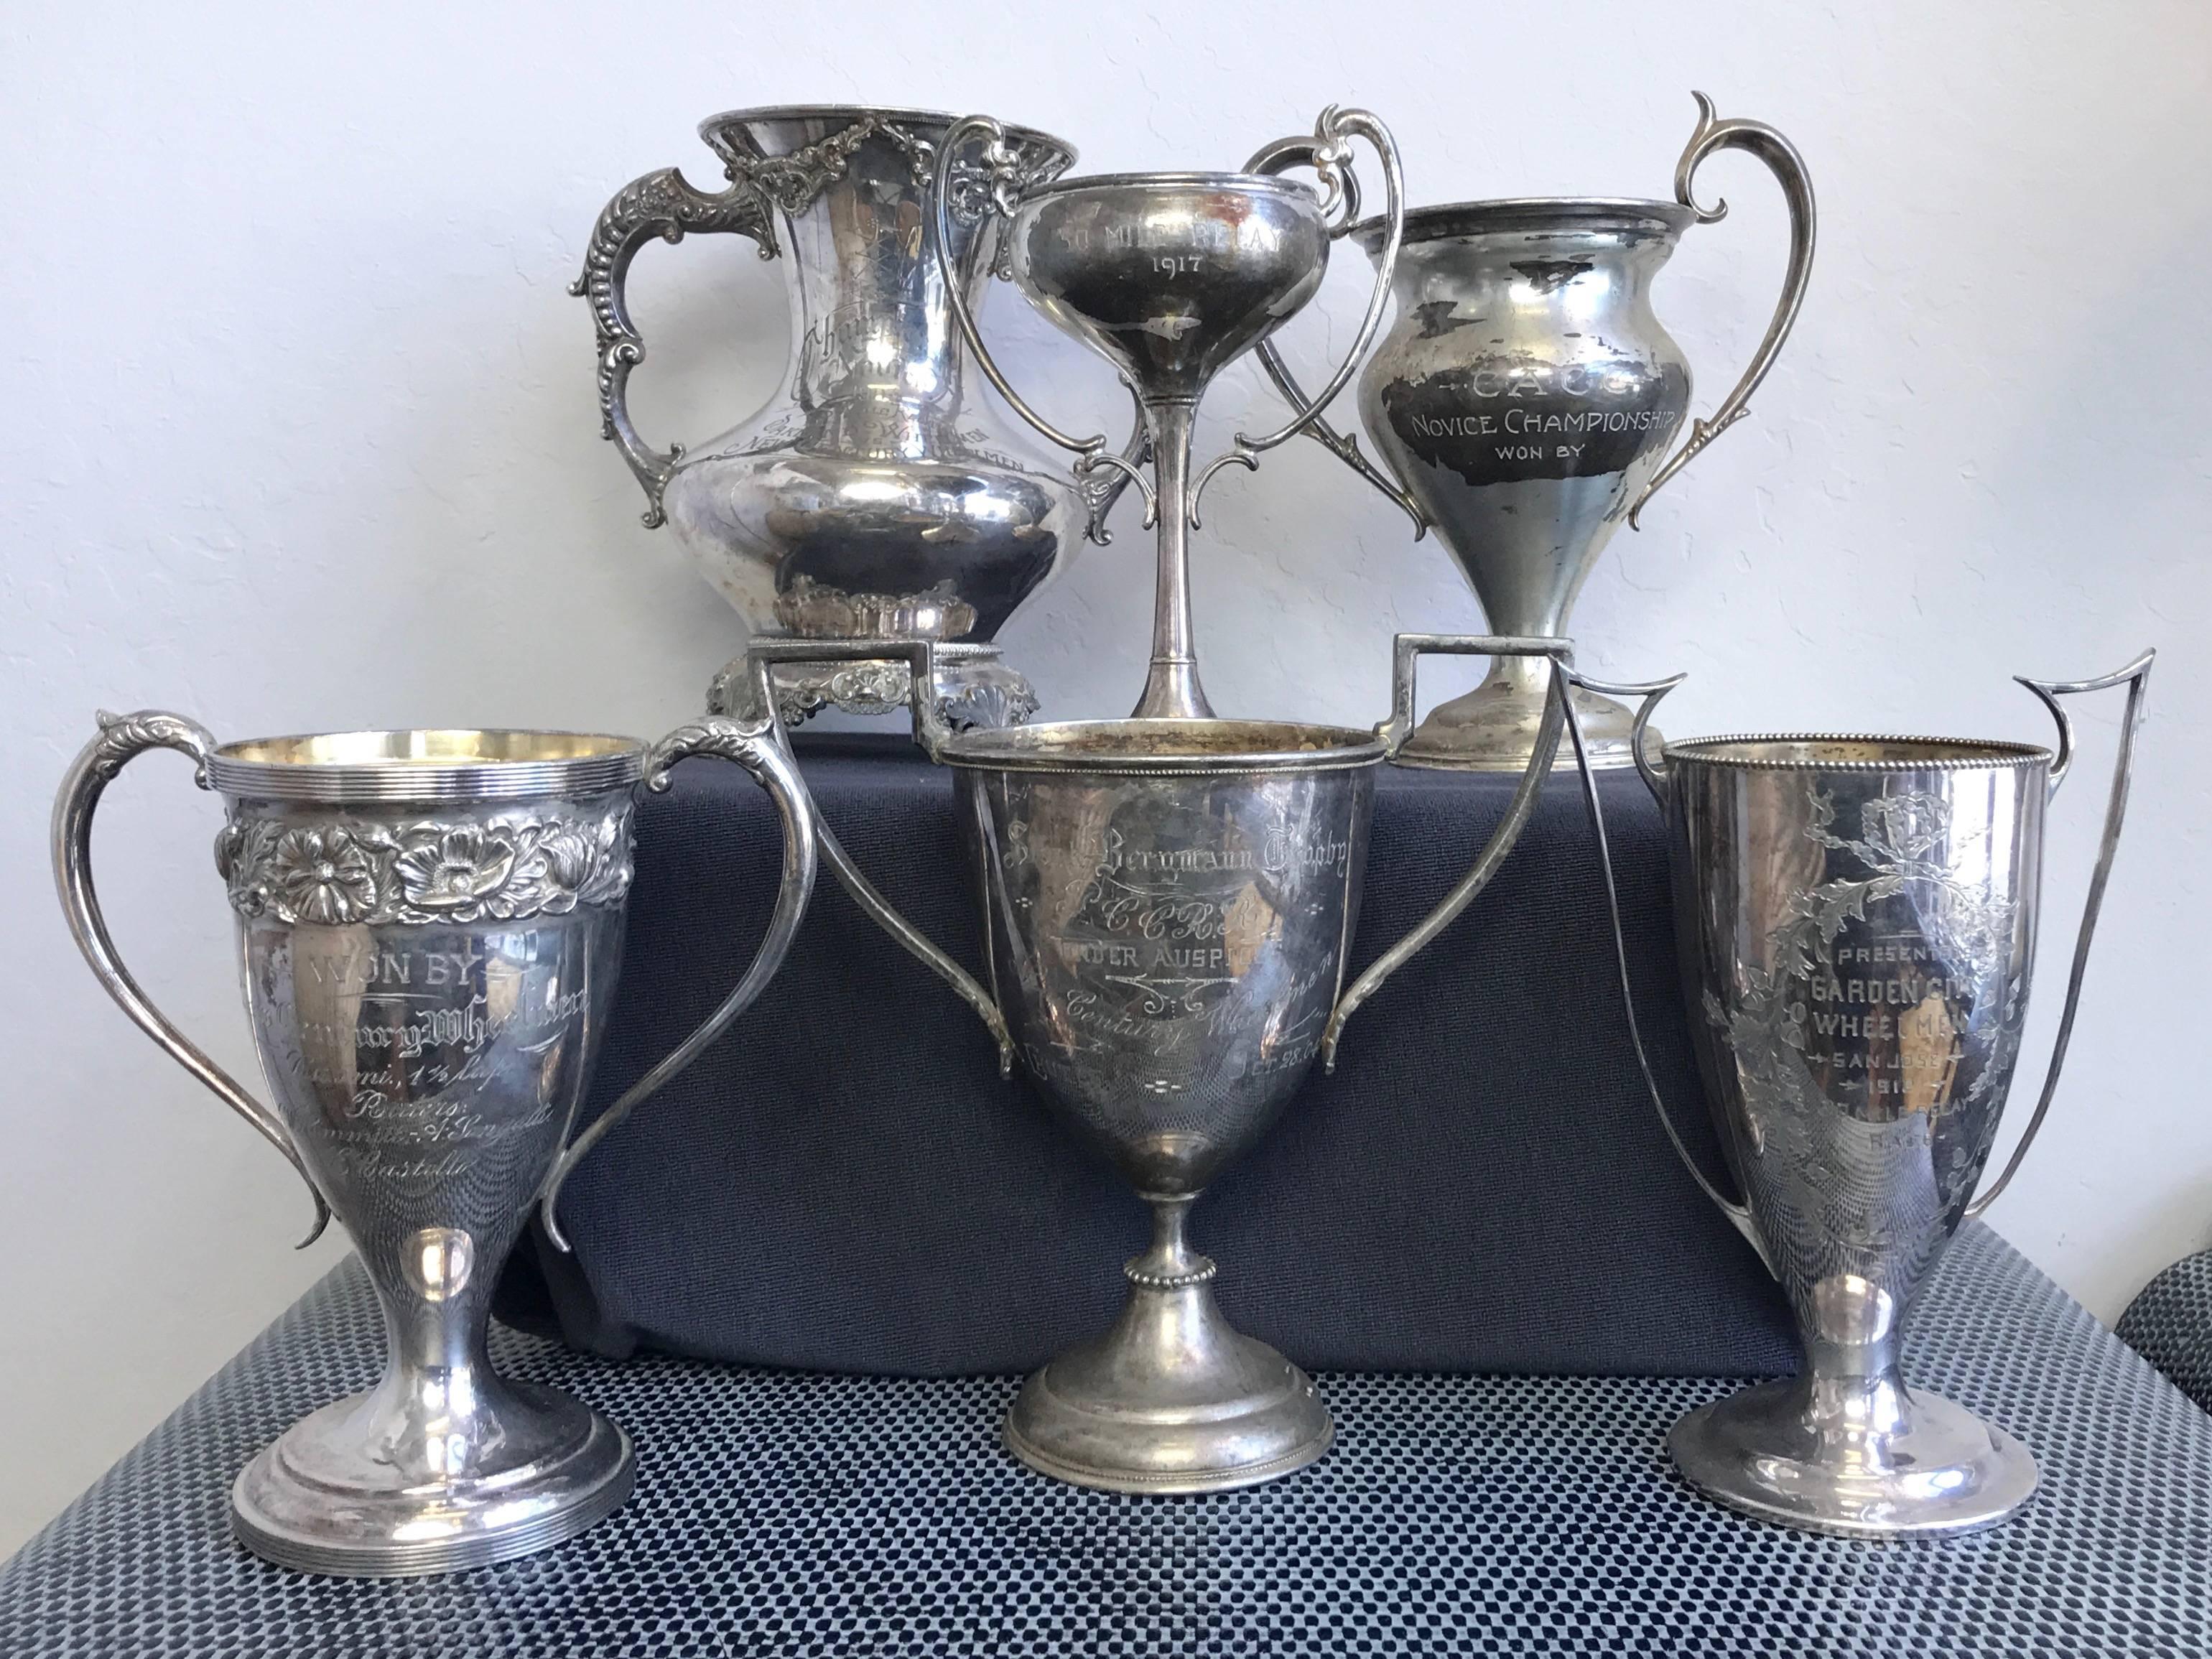 An historically important grouping of six Bay Area, California, silverplate cycling club trophies dating from 1903 to 1917.

A handsome collection of bicycle racing memorabilia, and a testament to San Francisco’s and its nearby cities’ indomitable